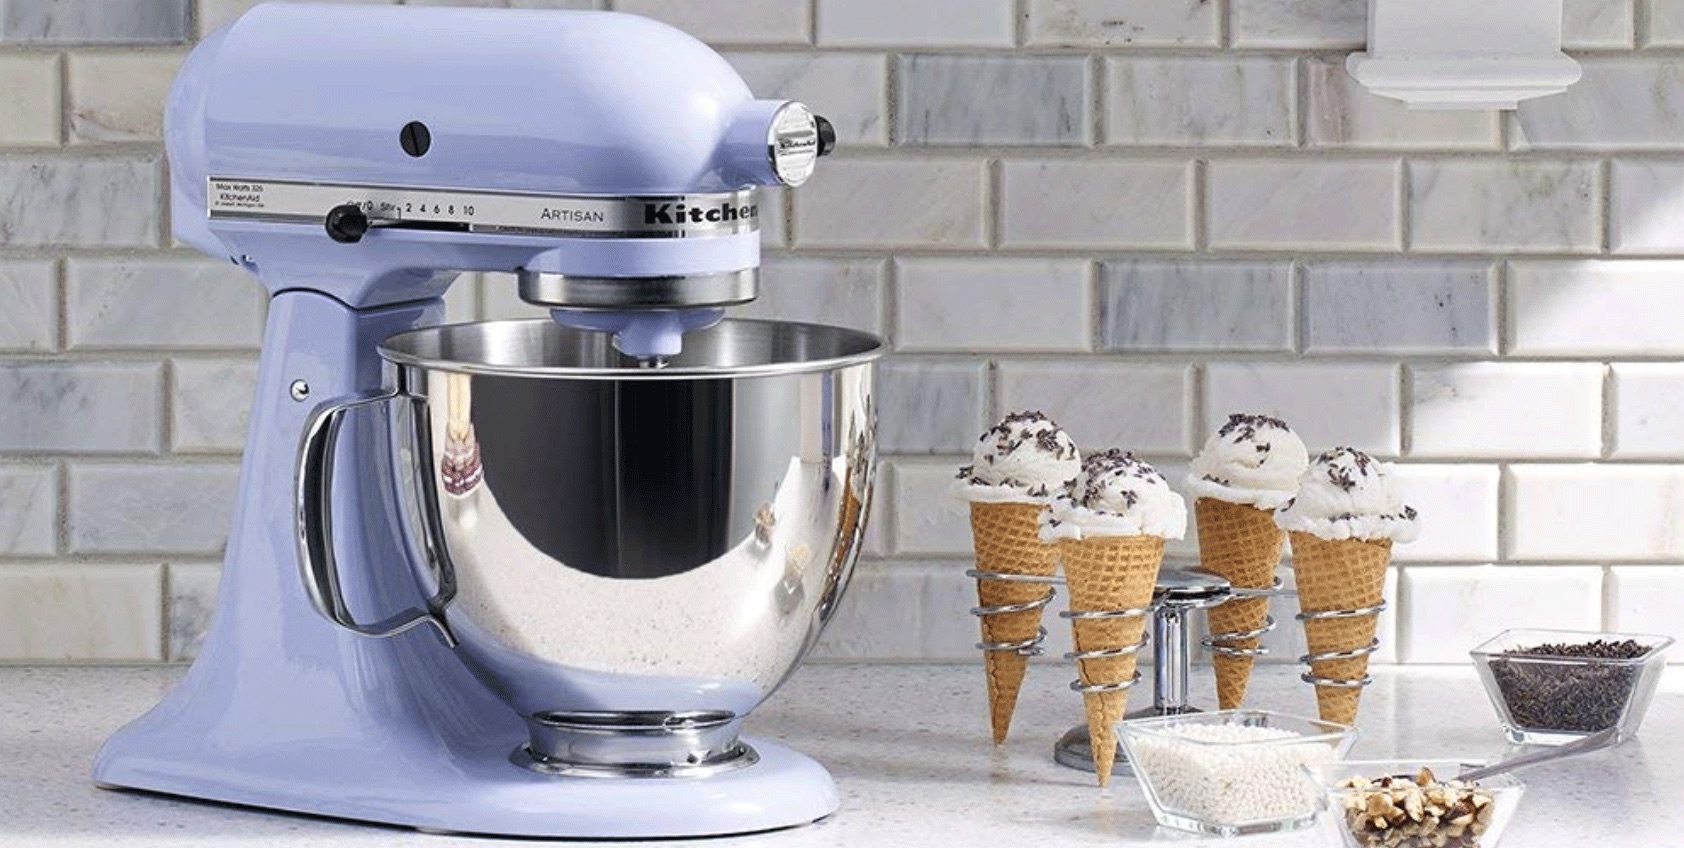 How To Choose The Right Kitchenaid Mixer